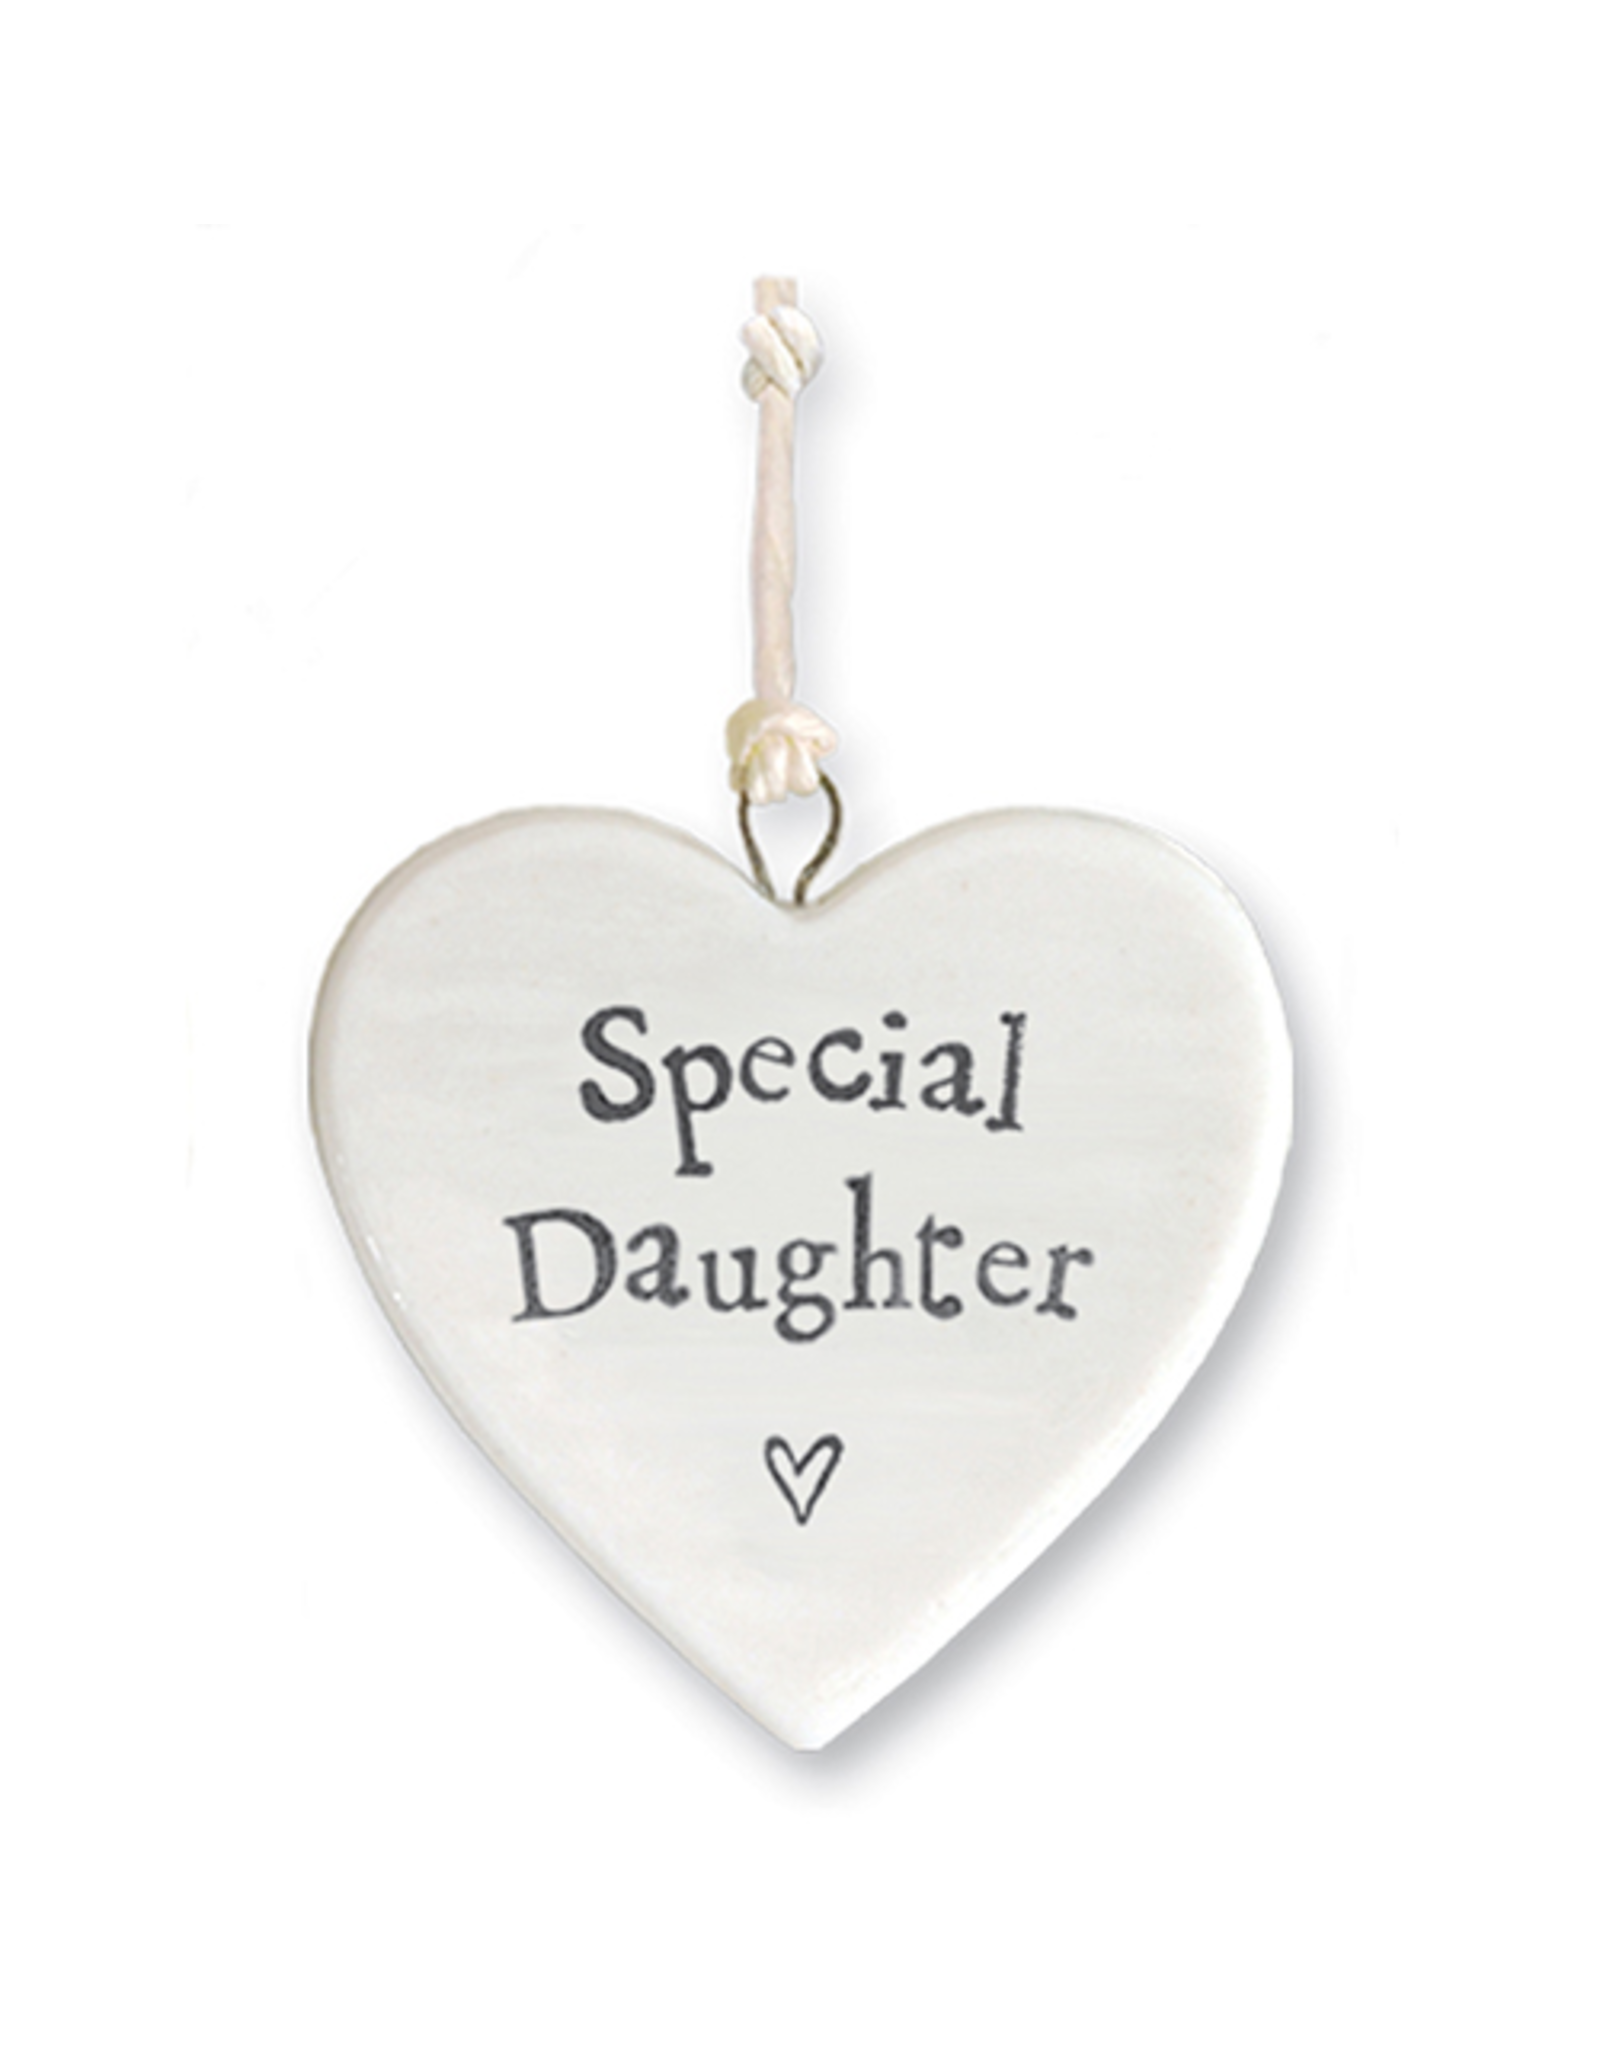 East of India Porcelain Heart Ornament Special Daughter